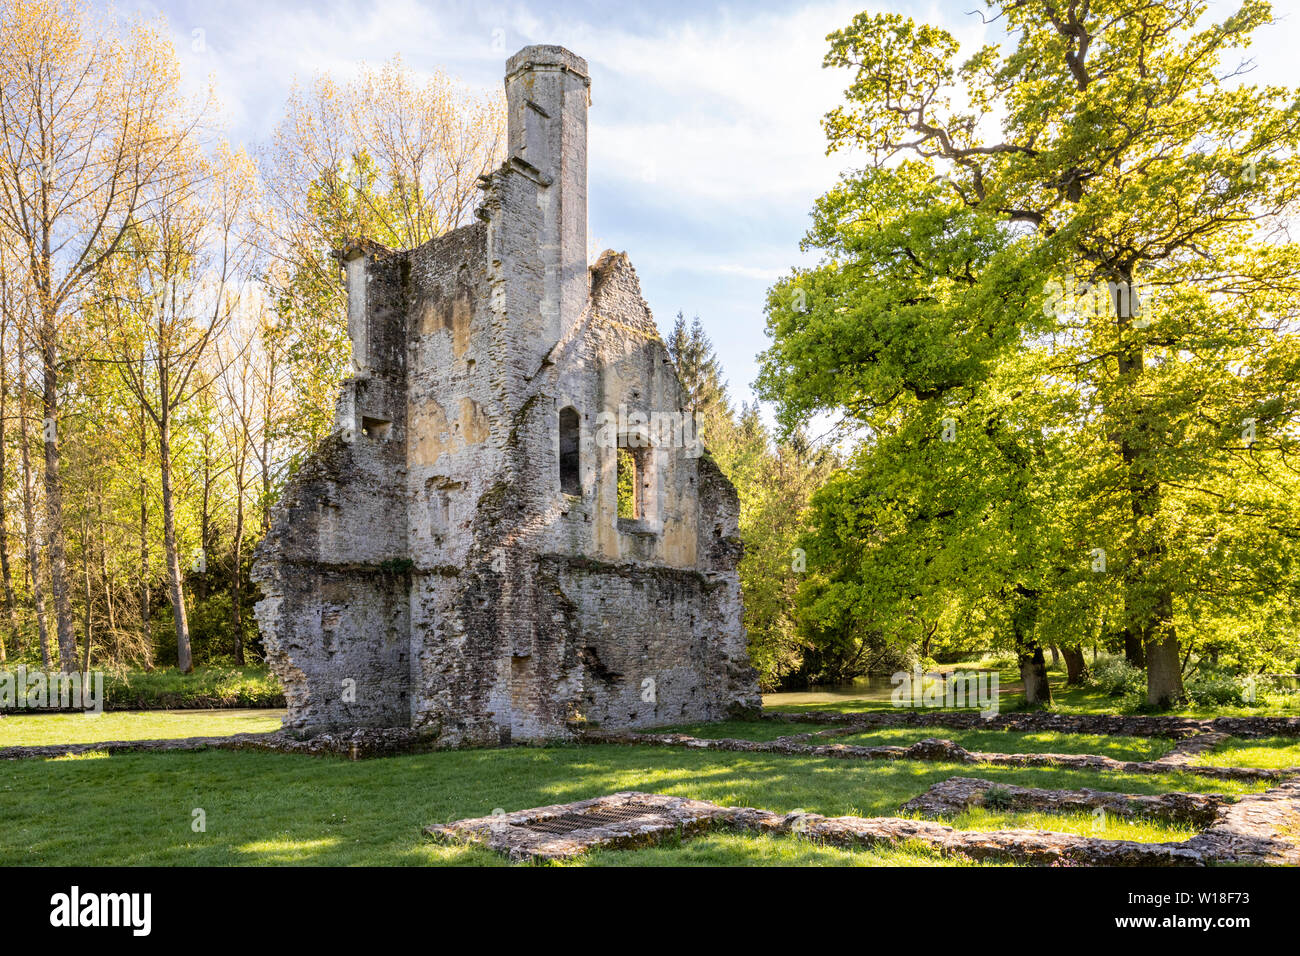 Evening light on the ruins of Minster Lovell Hall, a 15th century manor house beside the River Windrush, Minster Lovell, Oxfordshire UK Stock Photo